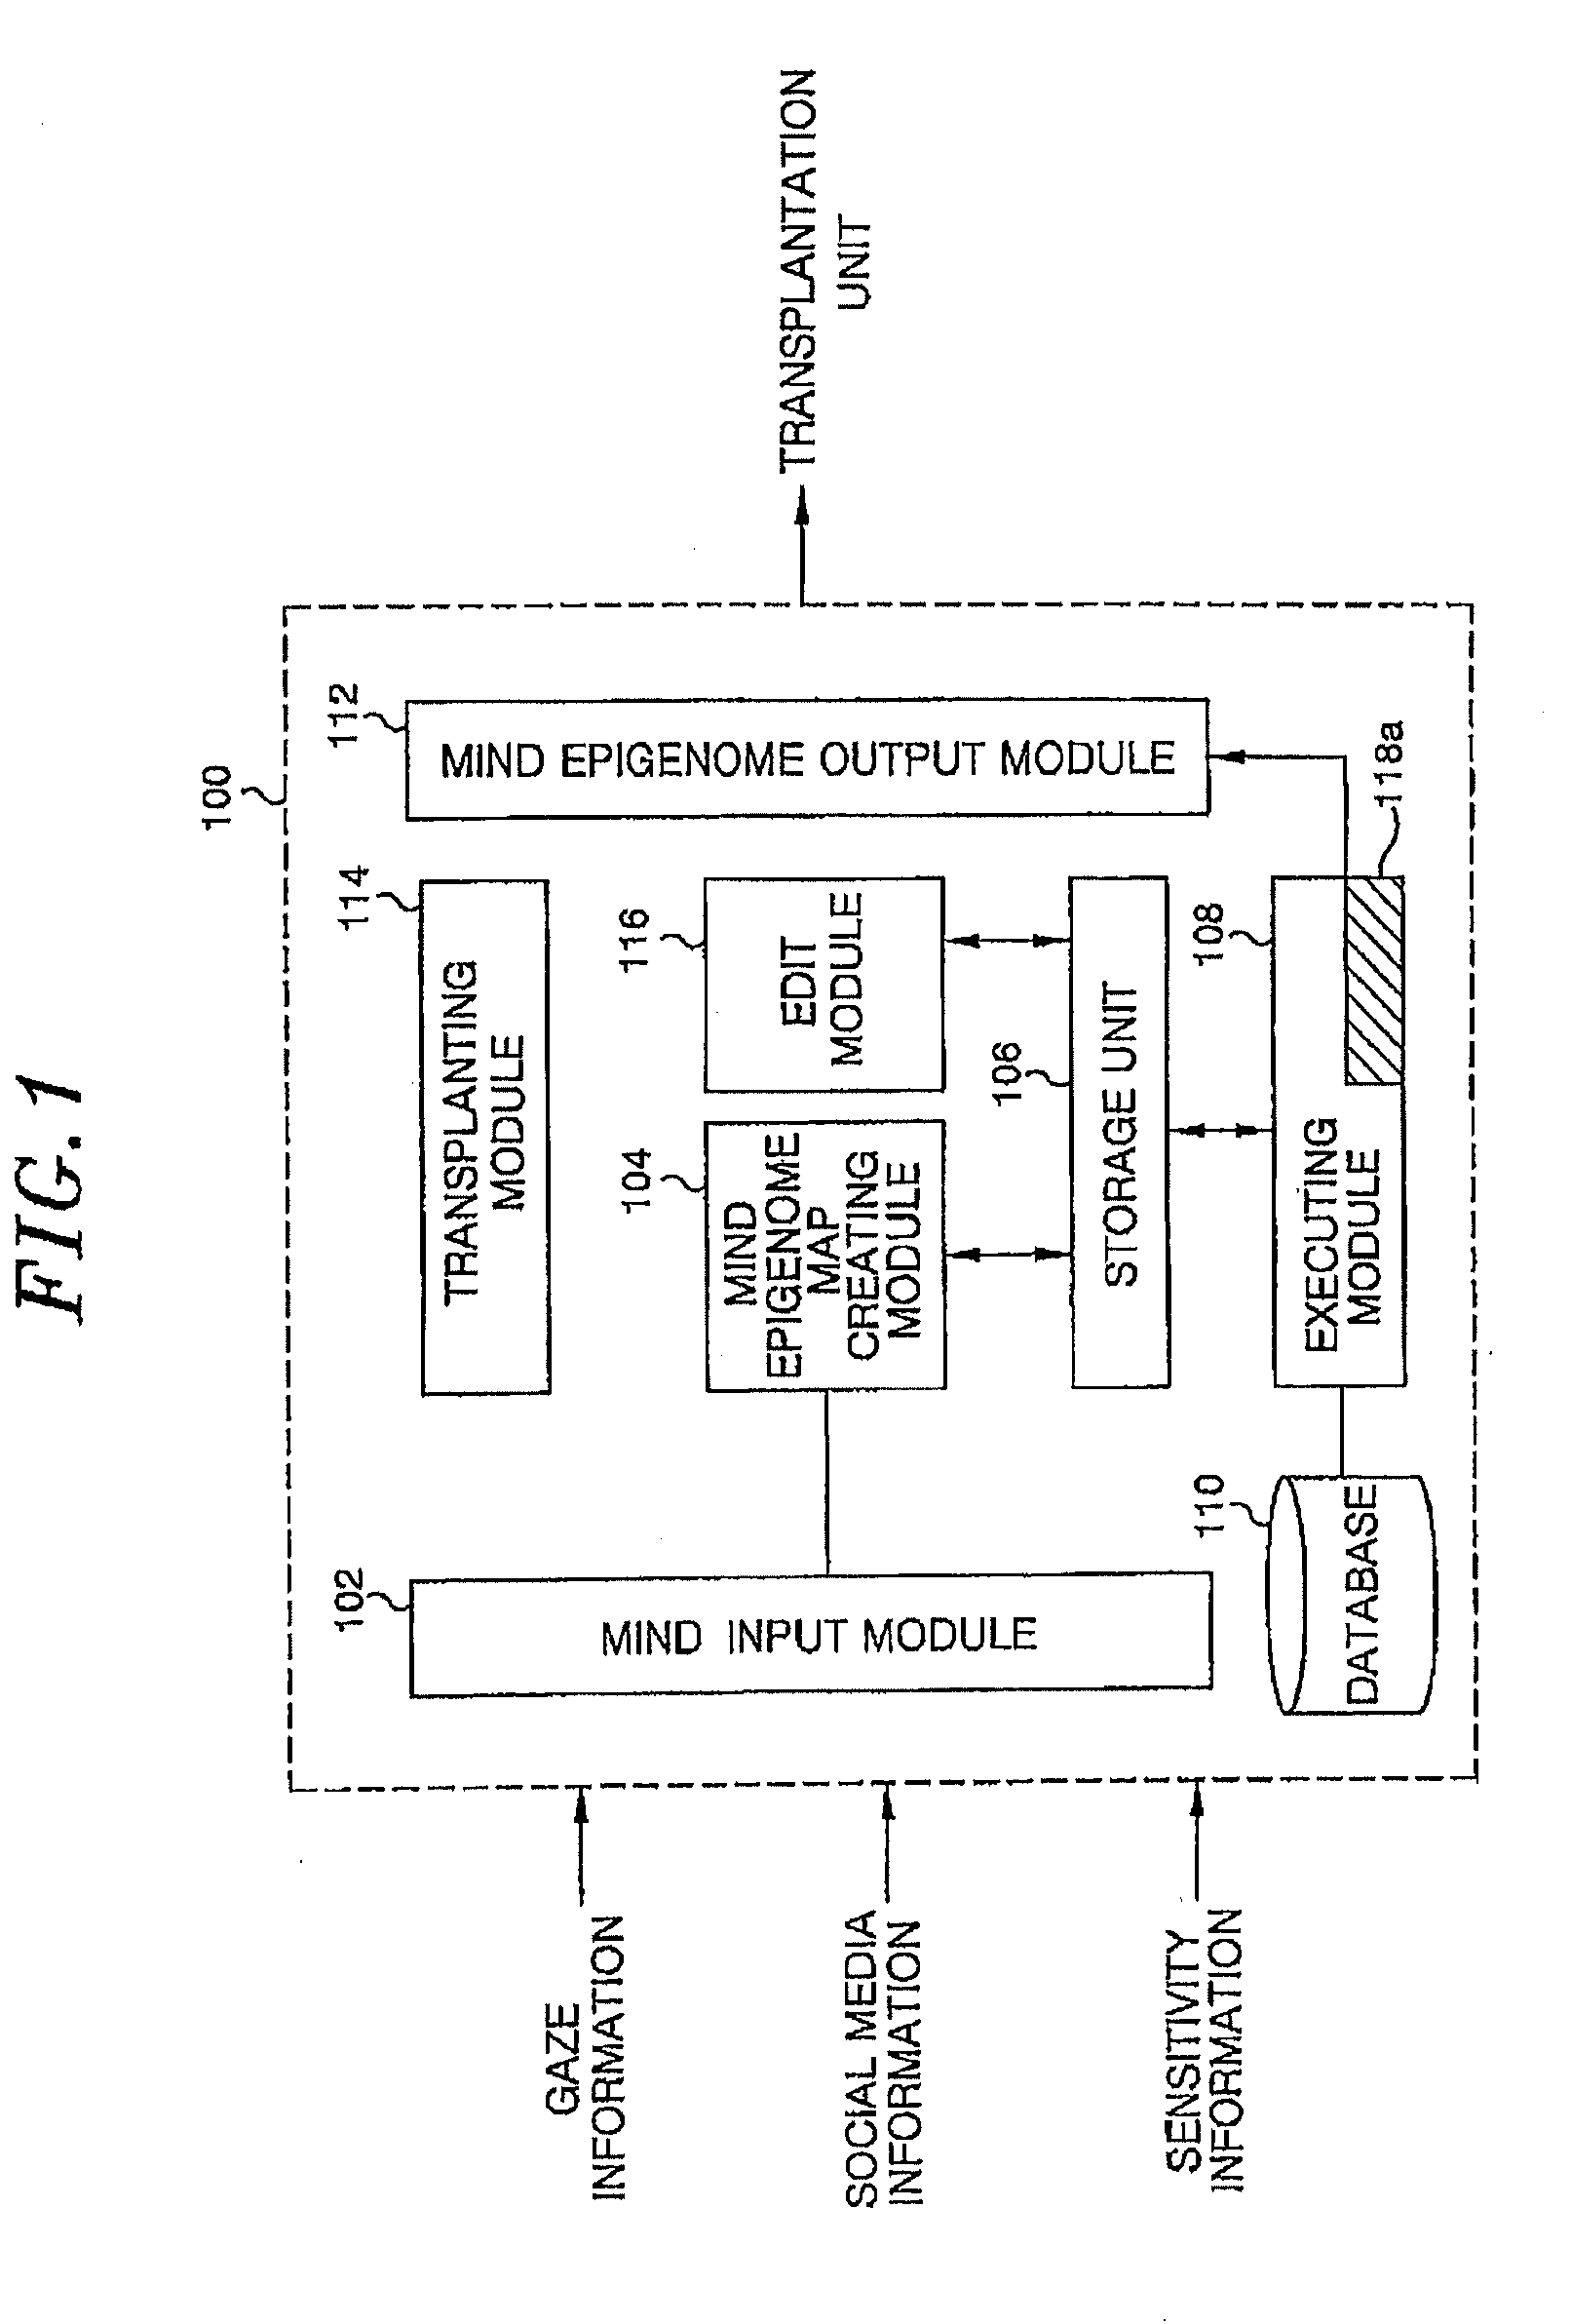 Apparatus and method for providing digital mind service